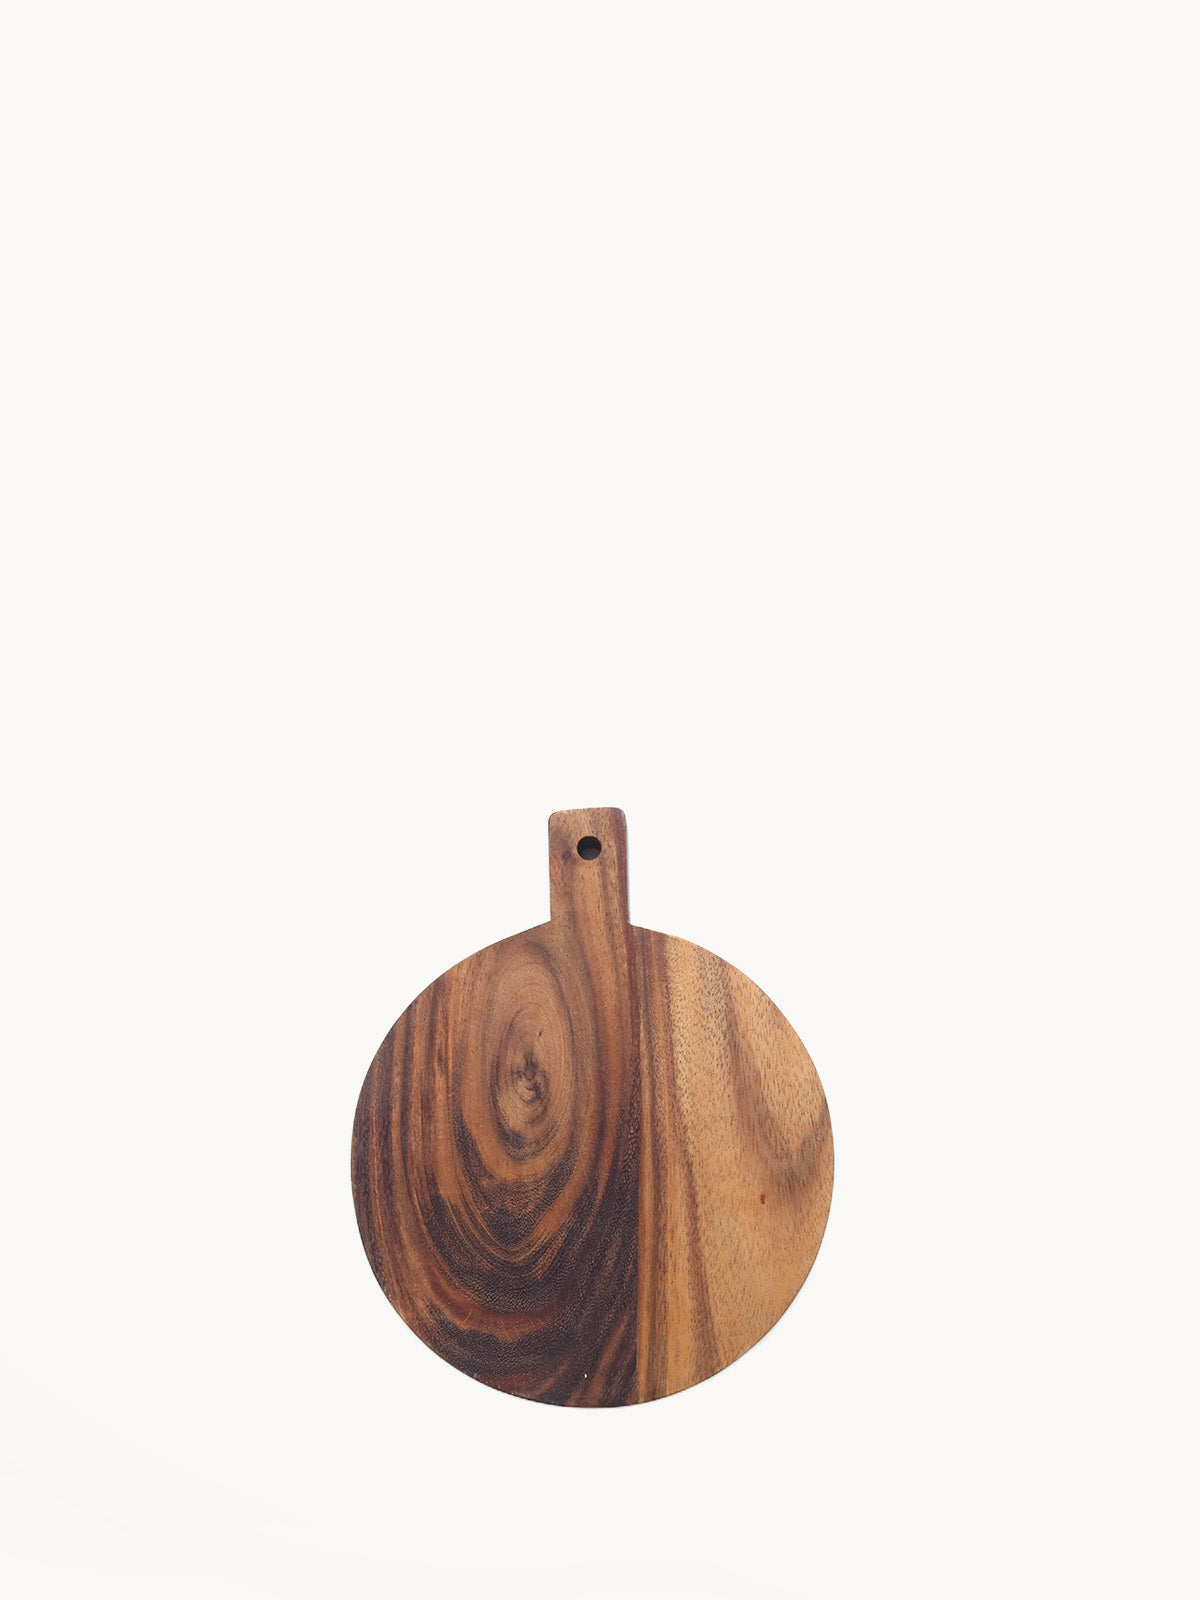 Small Wooden Round Serving Board